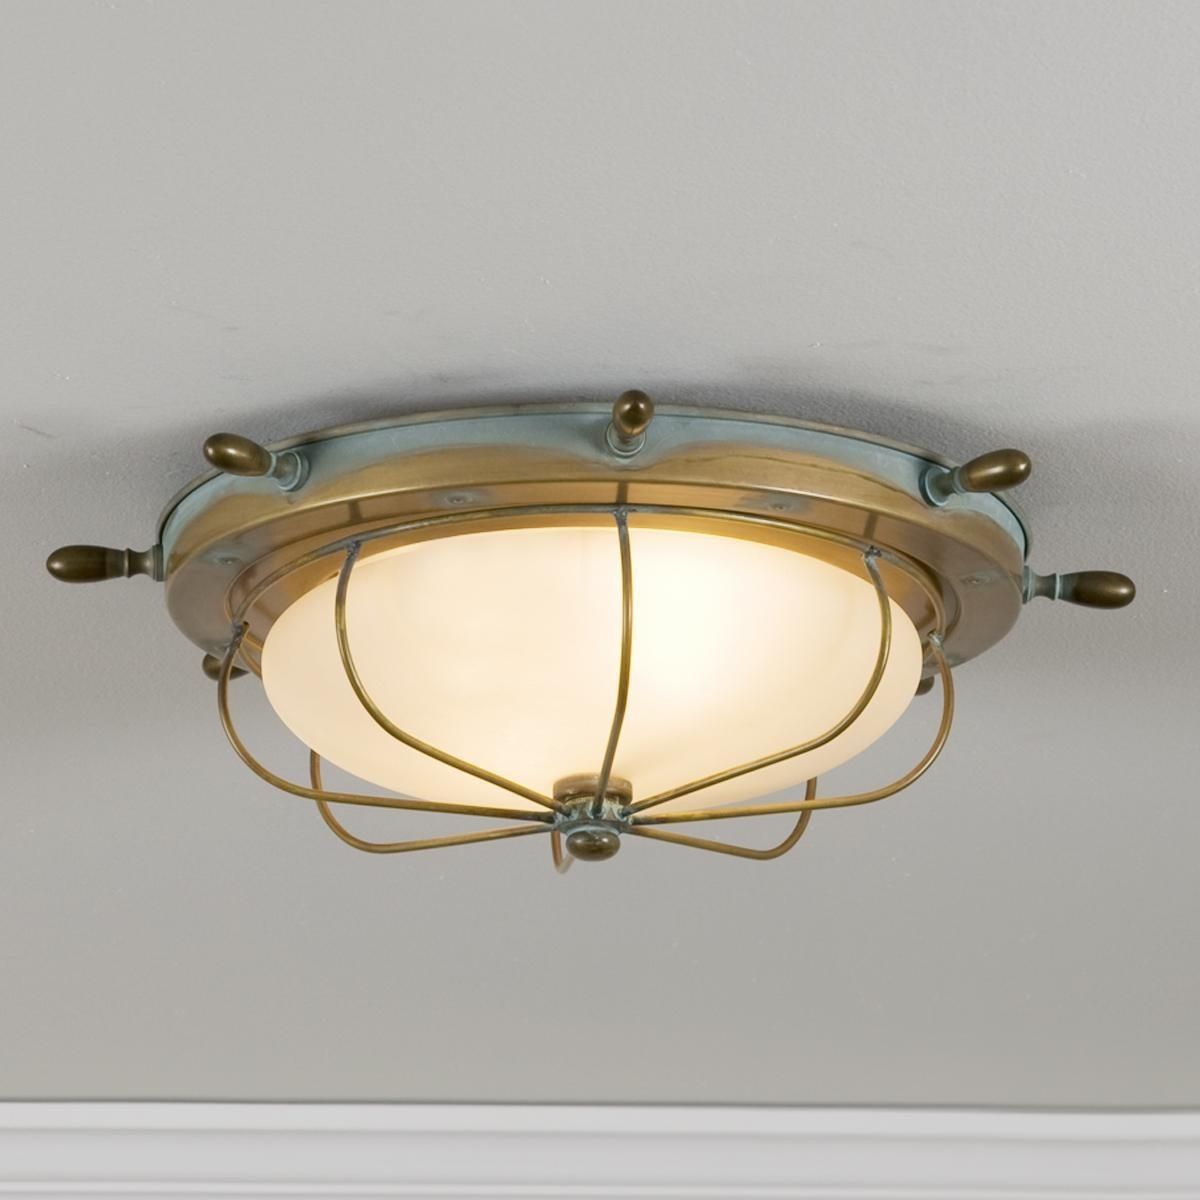 Captain's Ceiling Light | Ceiling Lights, Ceilings And Lights Throughout Coastal Outdoor Ceiling Lights (View 13 of 15)